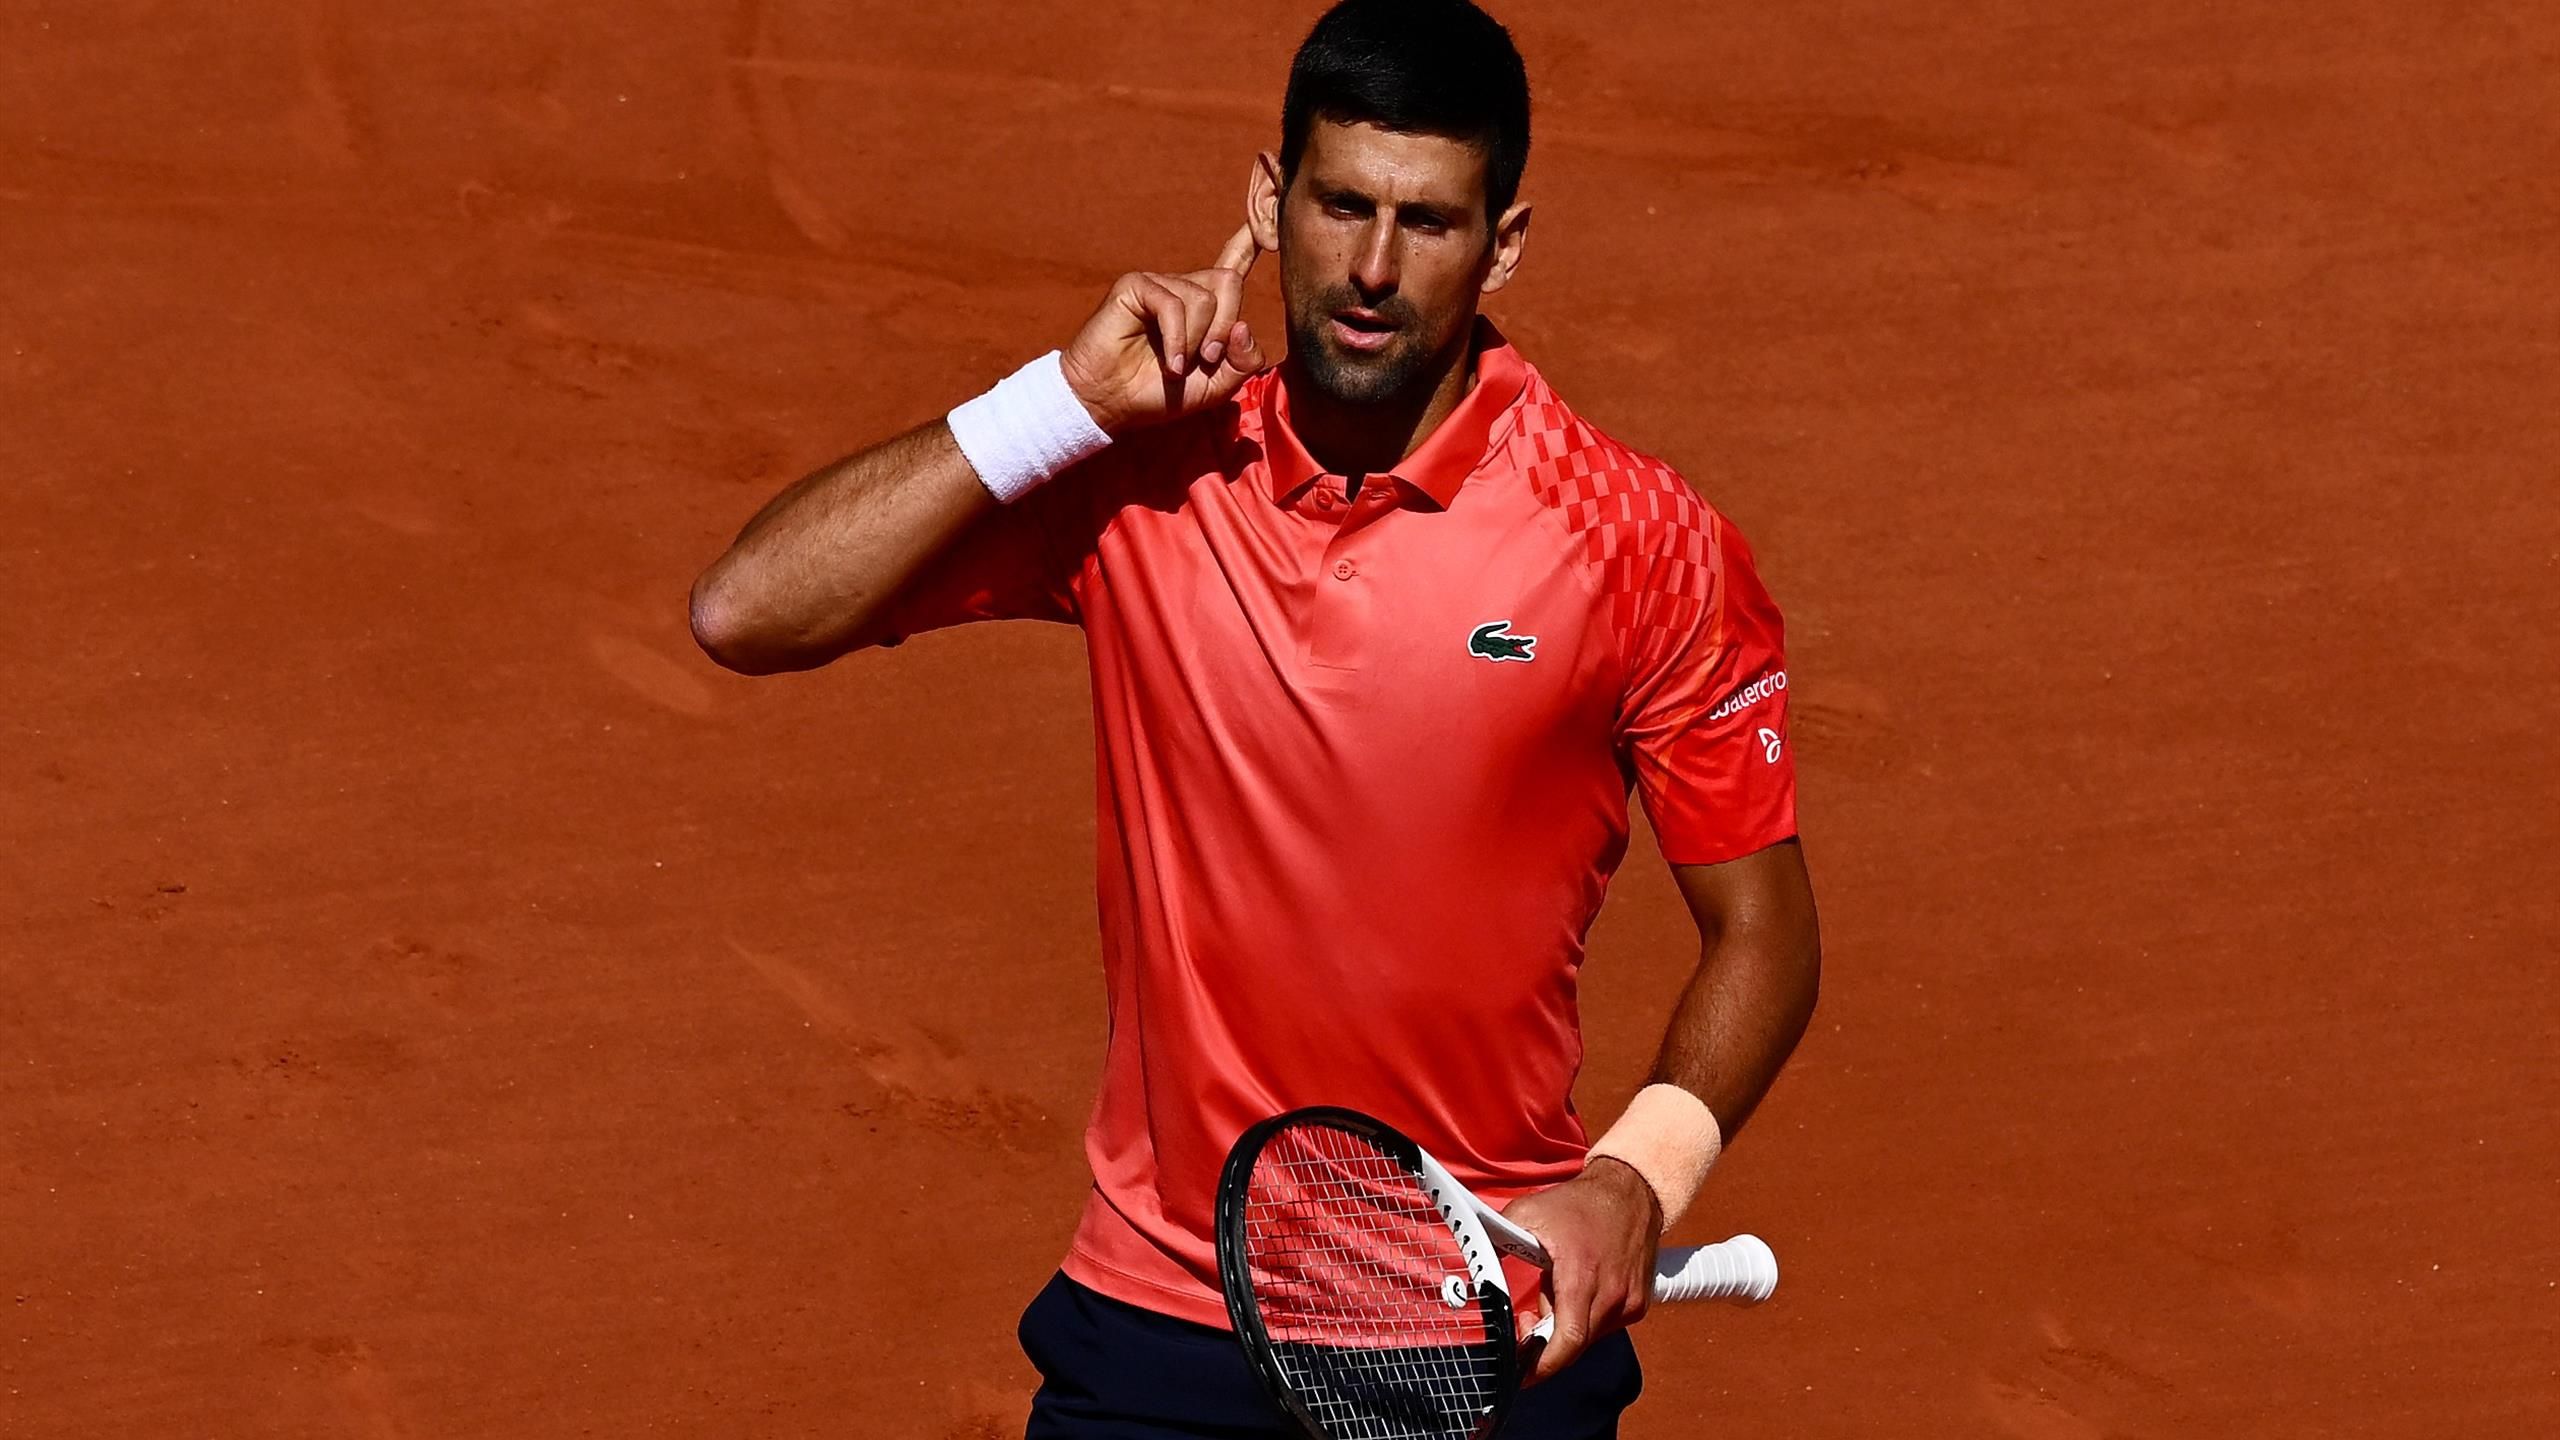 French Open 2023 Aggressive Novak Djokovic playing tennis on his terms at Roland-Garros says Tim Henman